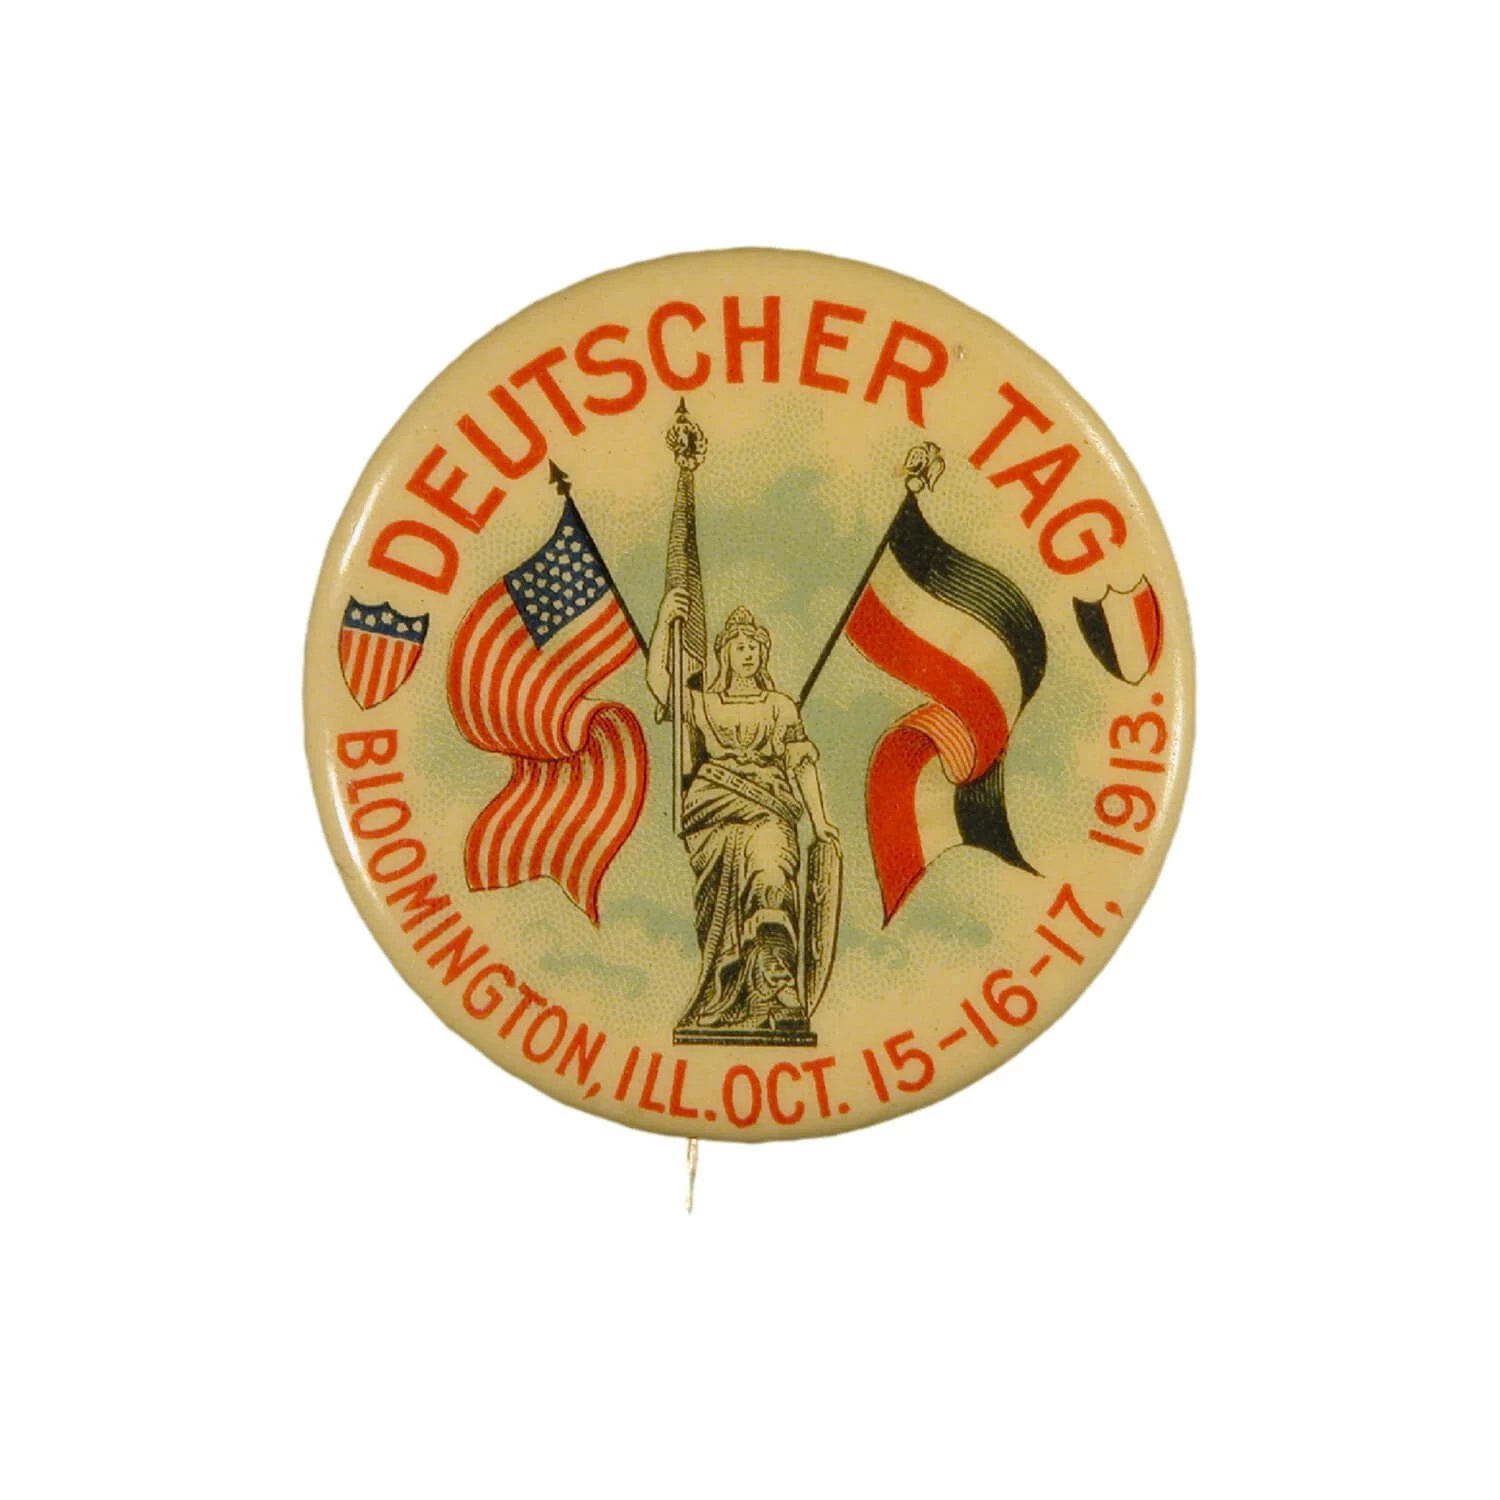 Pin with american and german flag. Text says DEUTSCHER TAG and Bloomington IL Oct 15-16-17, 1913.